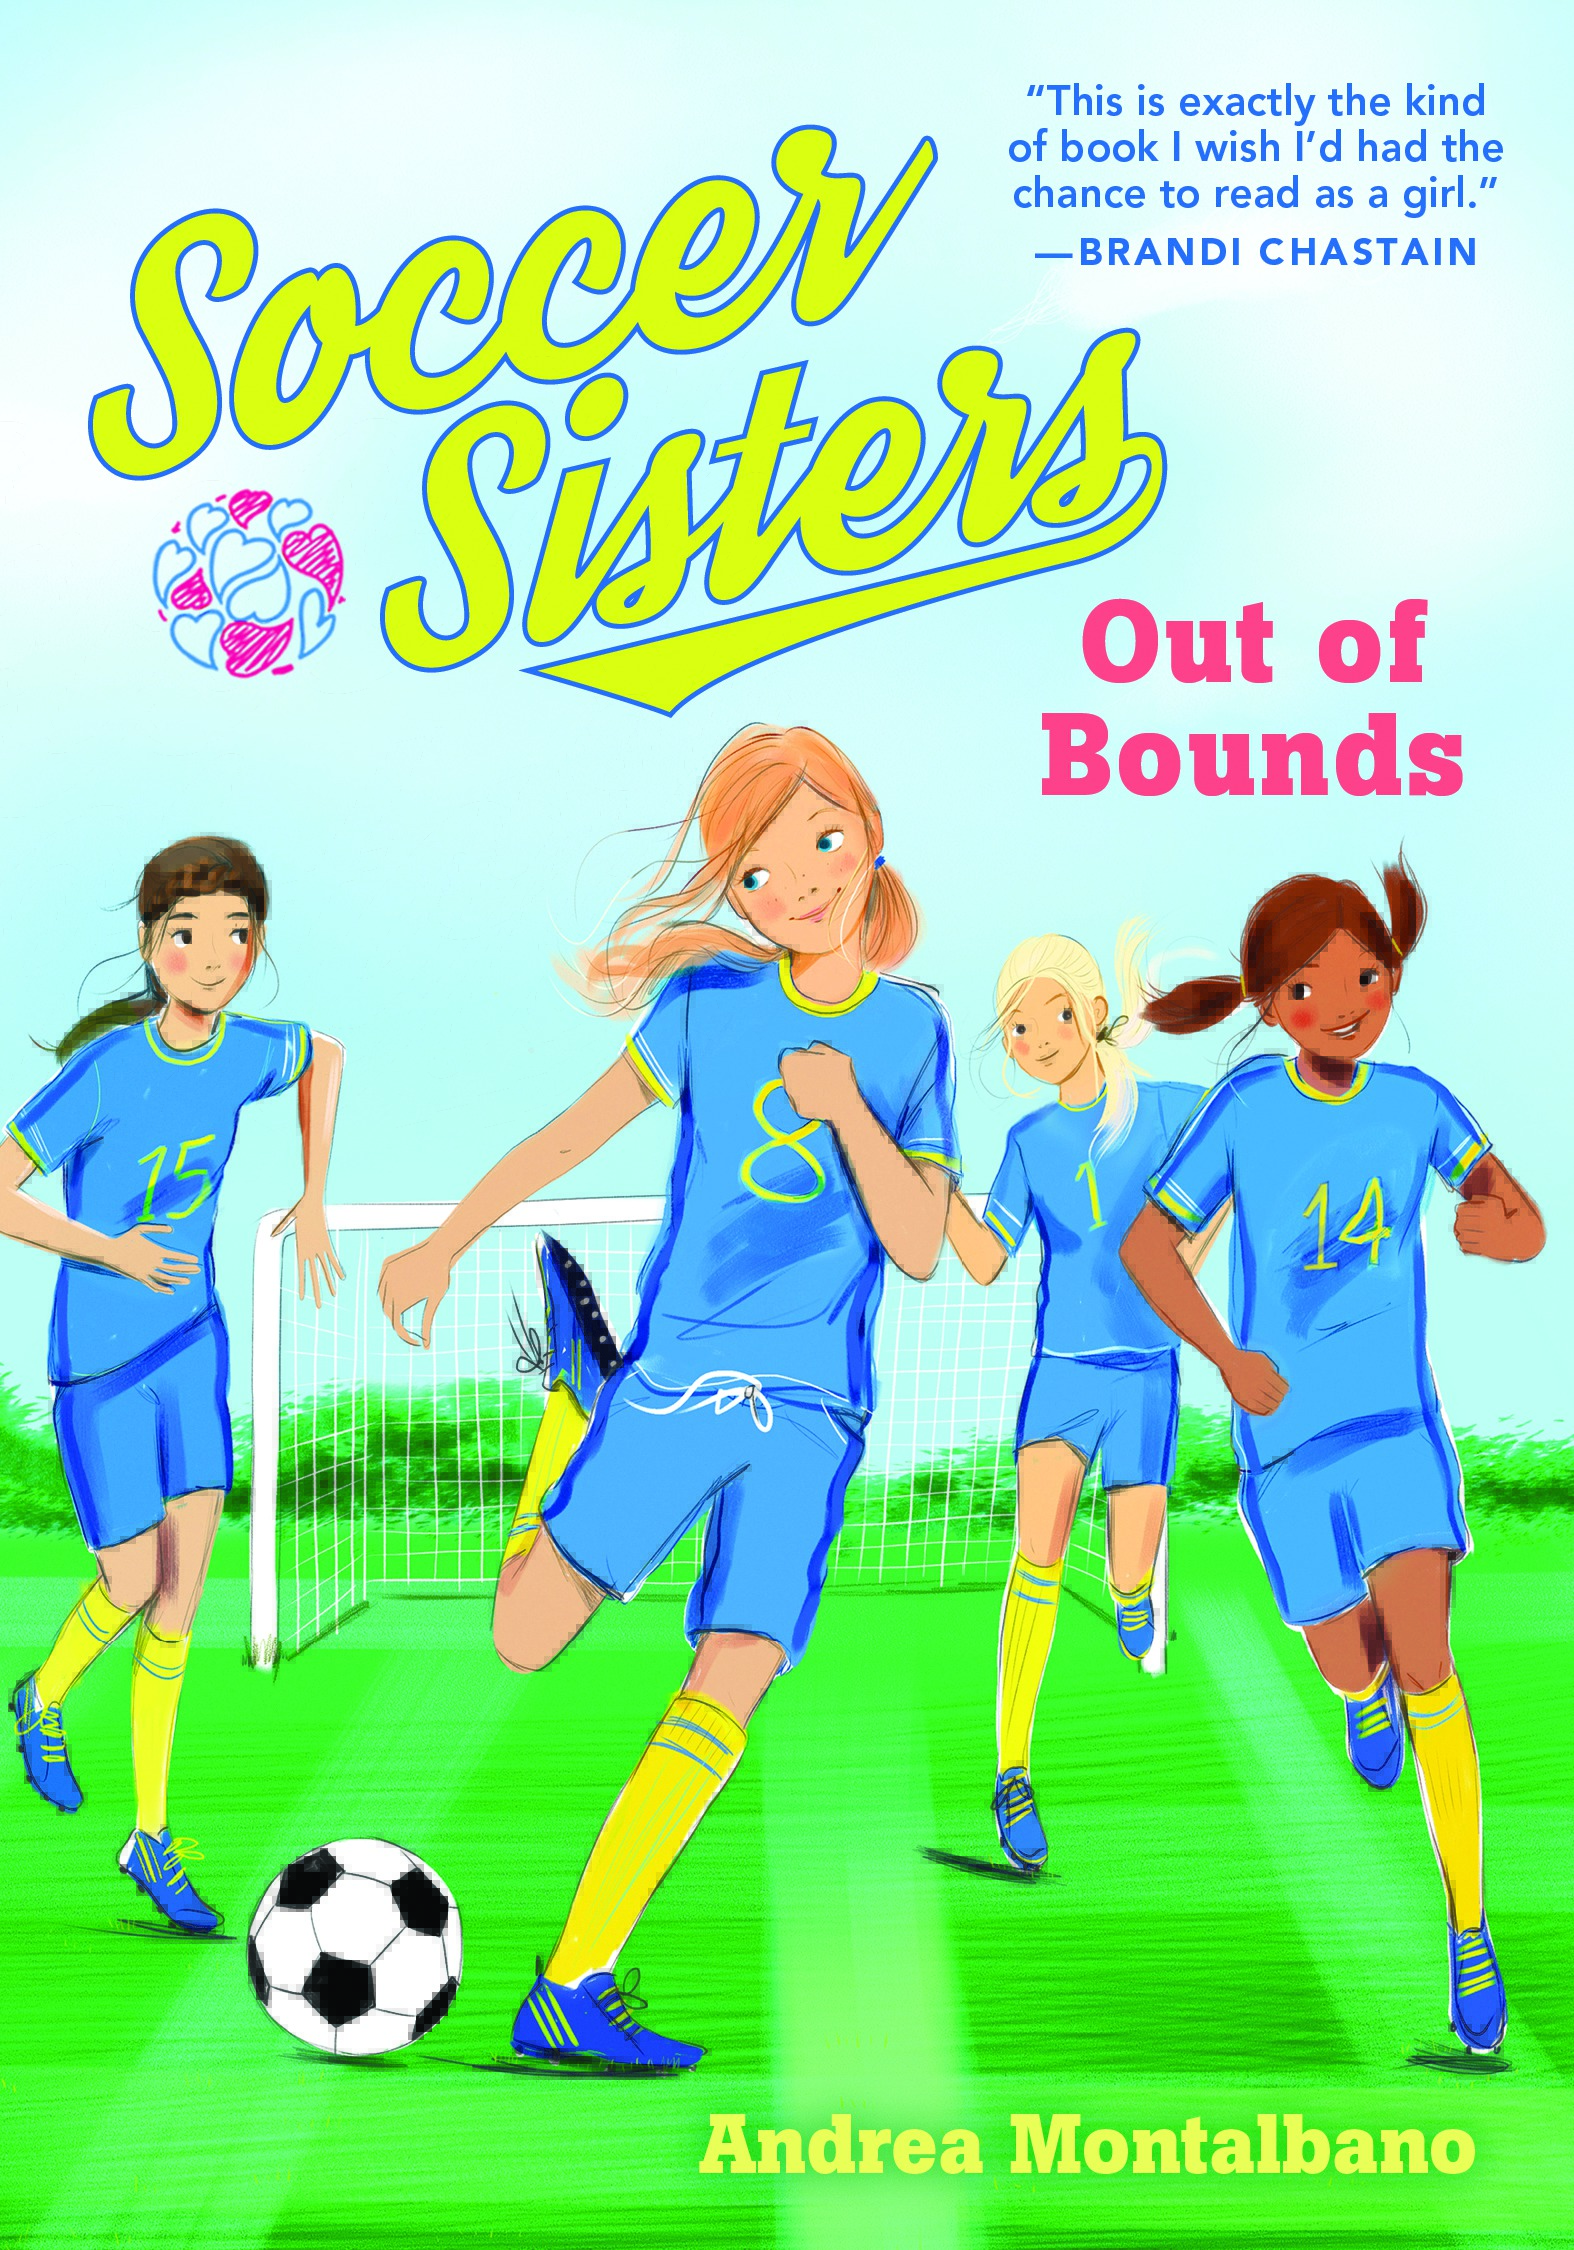 Out of Bounds | Kids' BookBuzz